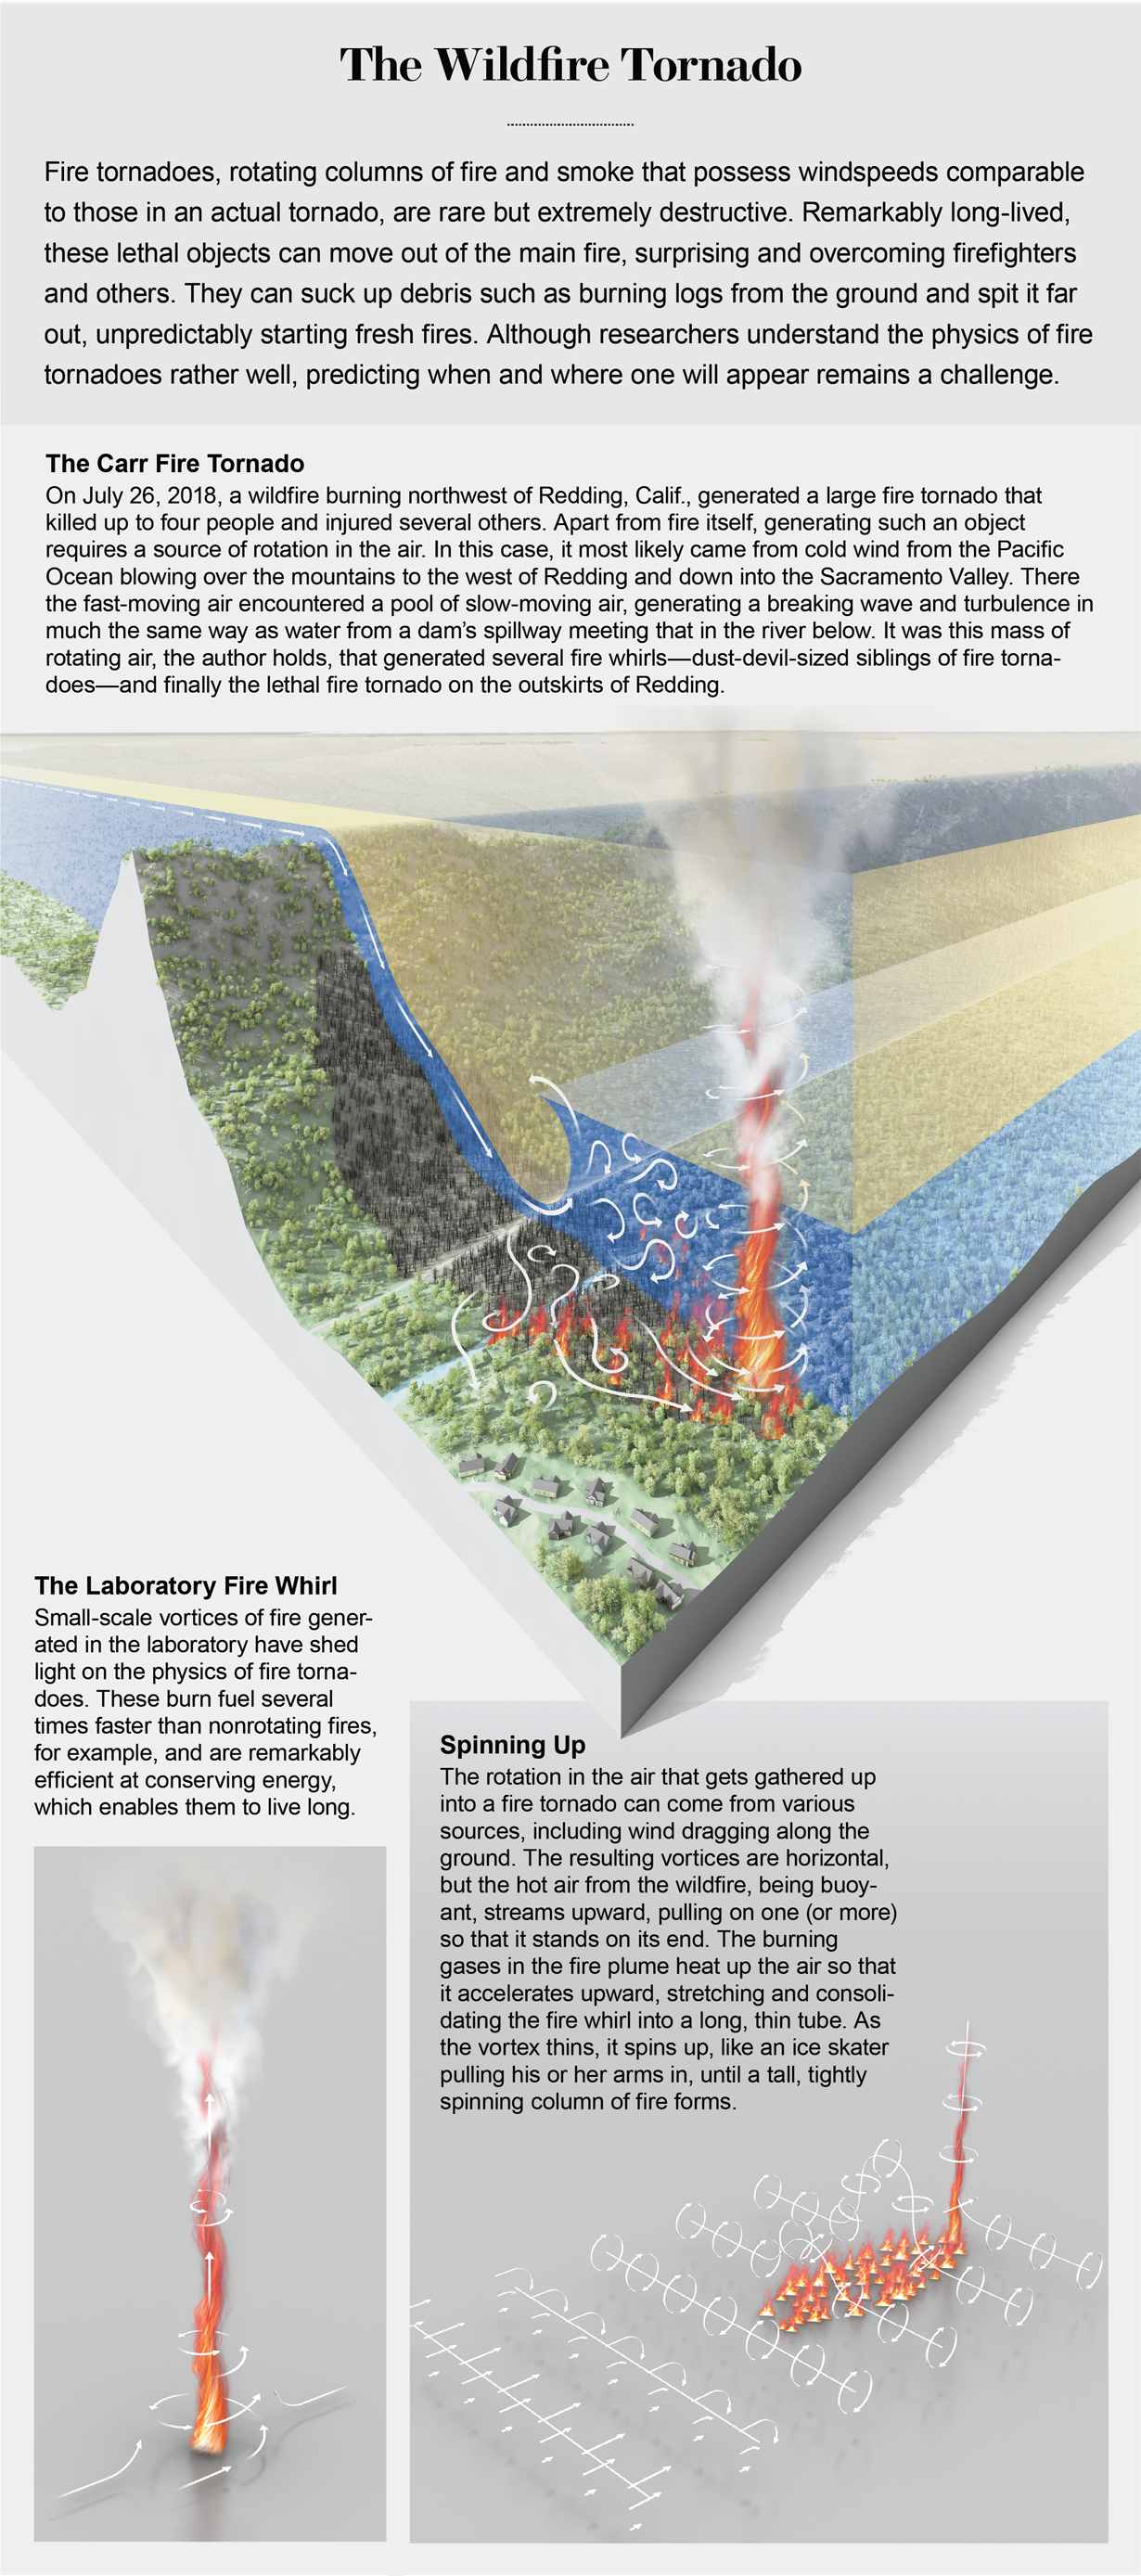 Graphic represents two ingredients needed for fire tornadoes: fire and a source of air rotation. Hot air accelerates upward, stretching the fire whirl into a tall tube.